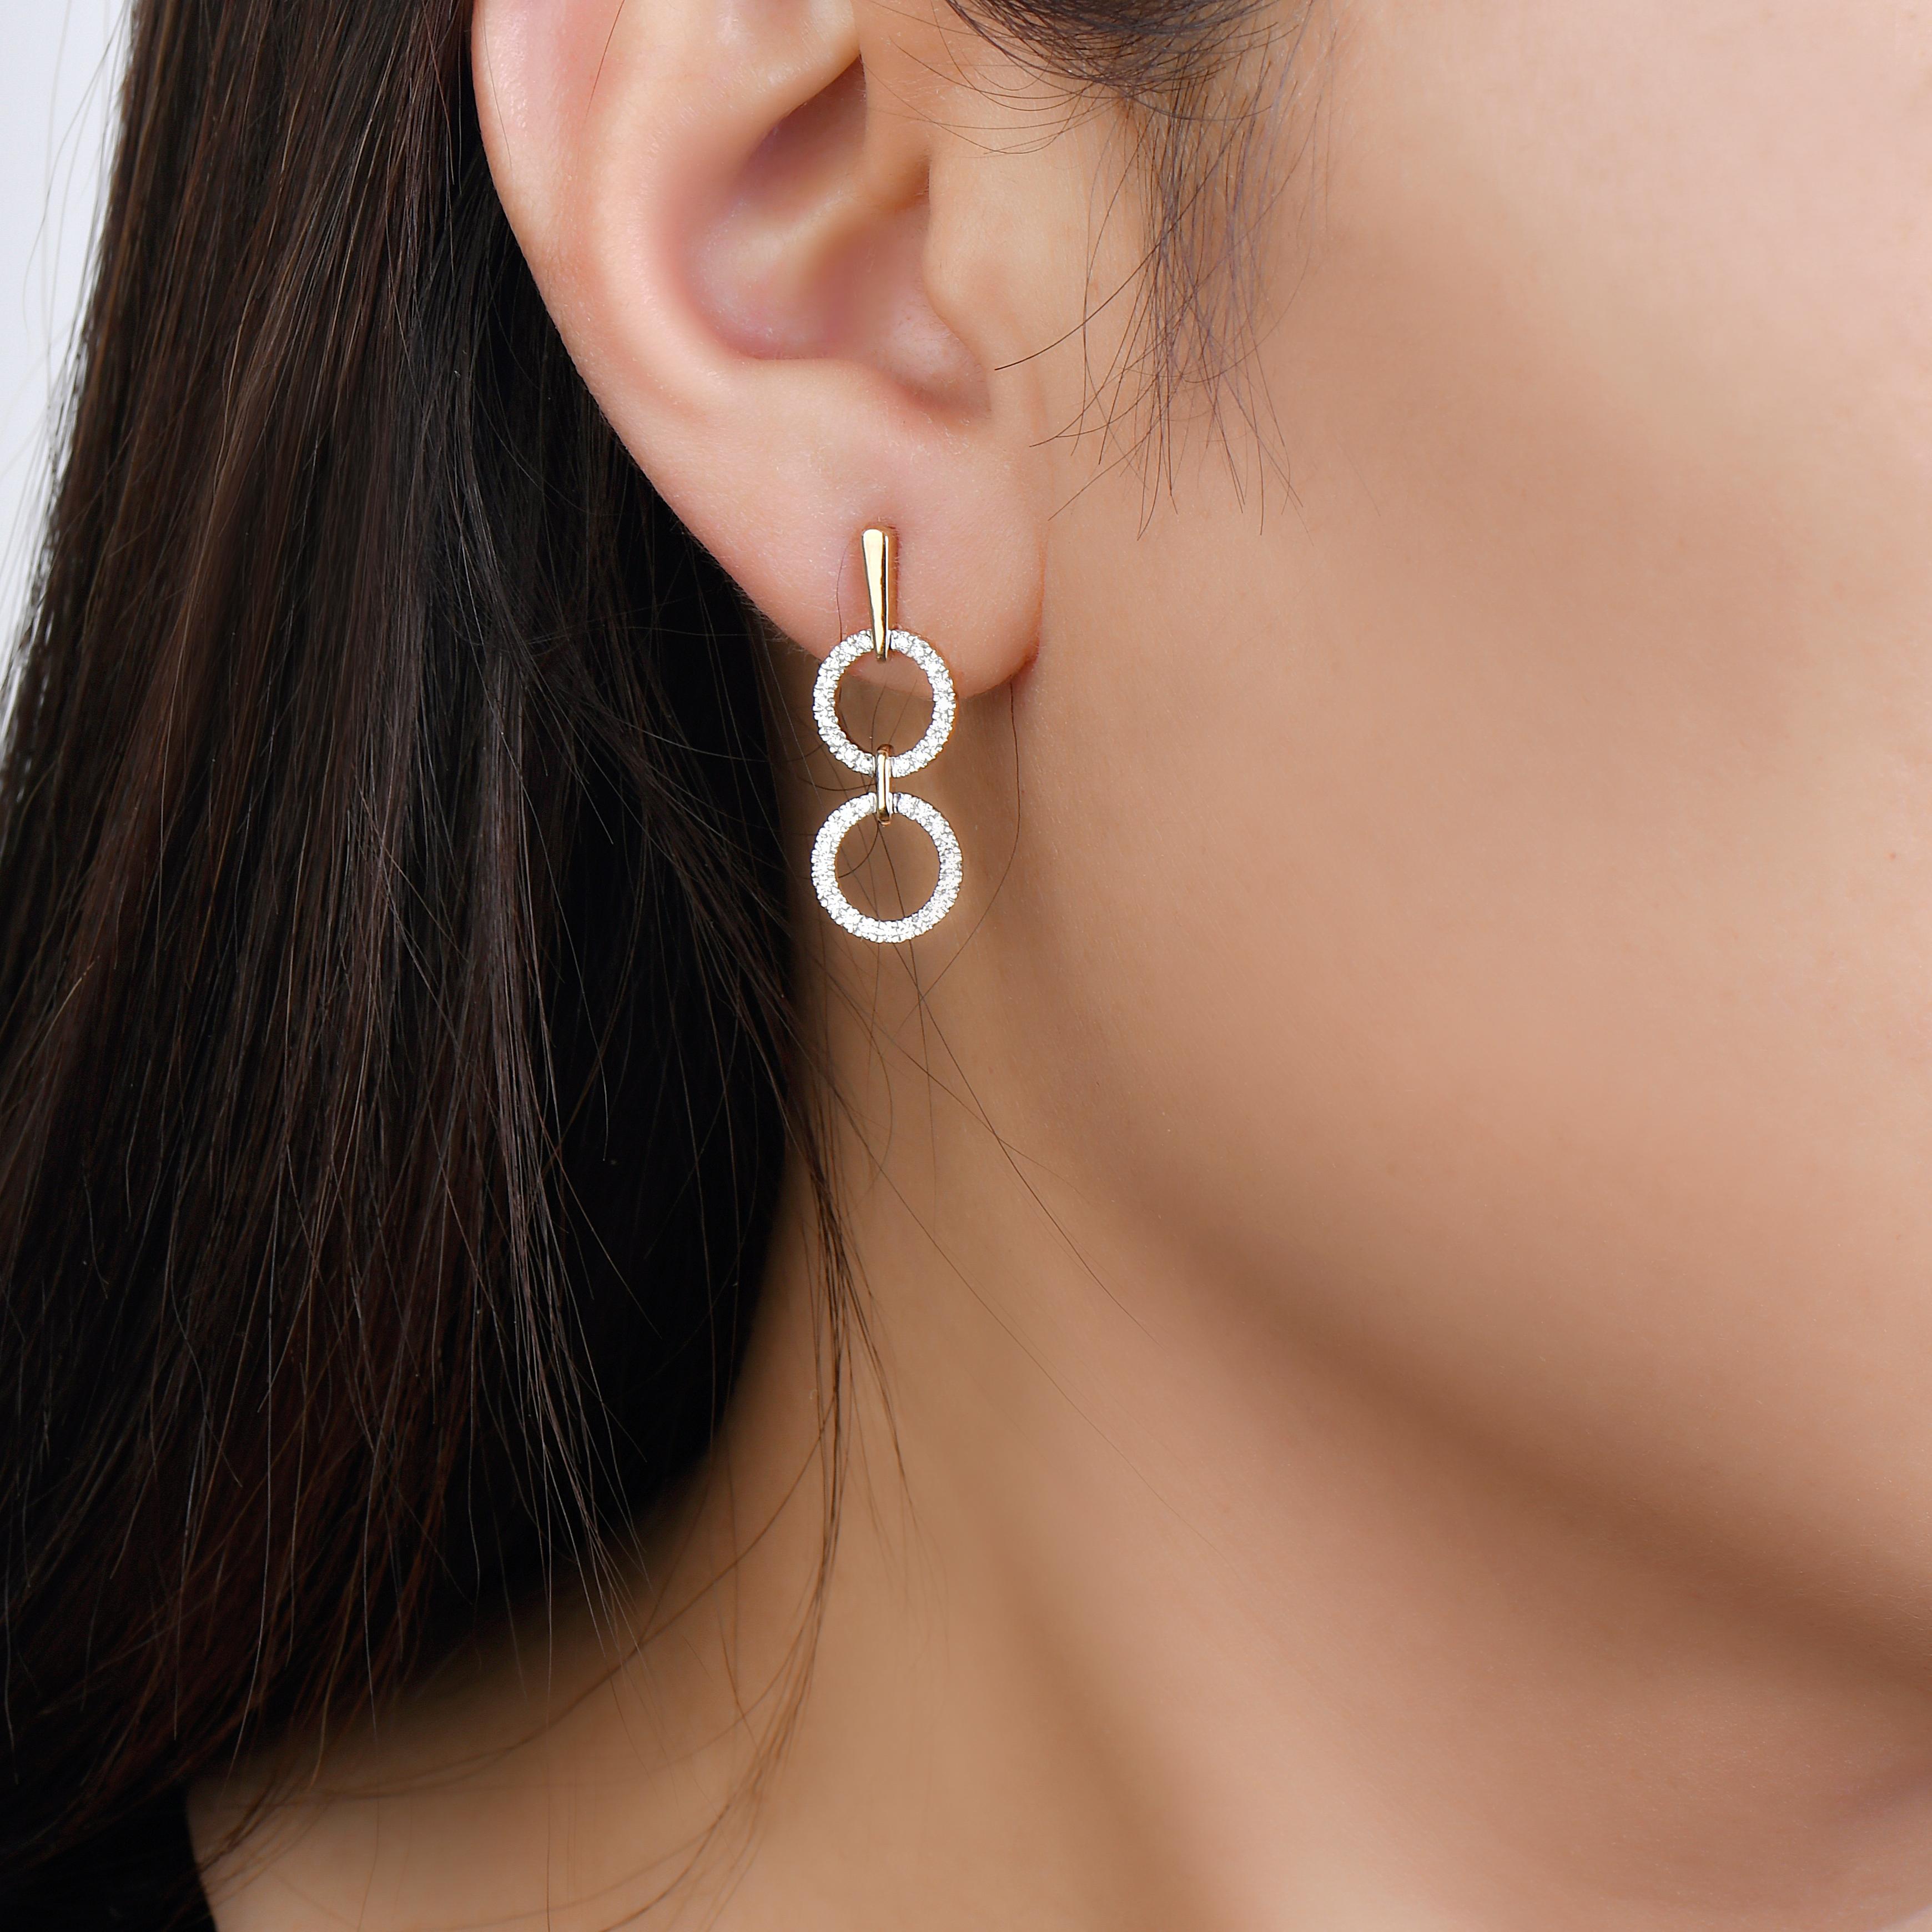 A different take on dangling earrings, these geo art earrings have more of a hang than a dangle. However, that does not make them any less stunning. The diamond dangling earrings in 14K white gold are perfect to gift someone you share a special